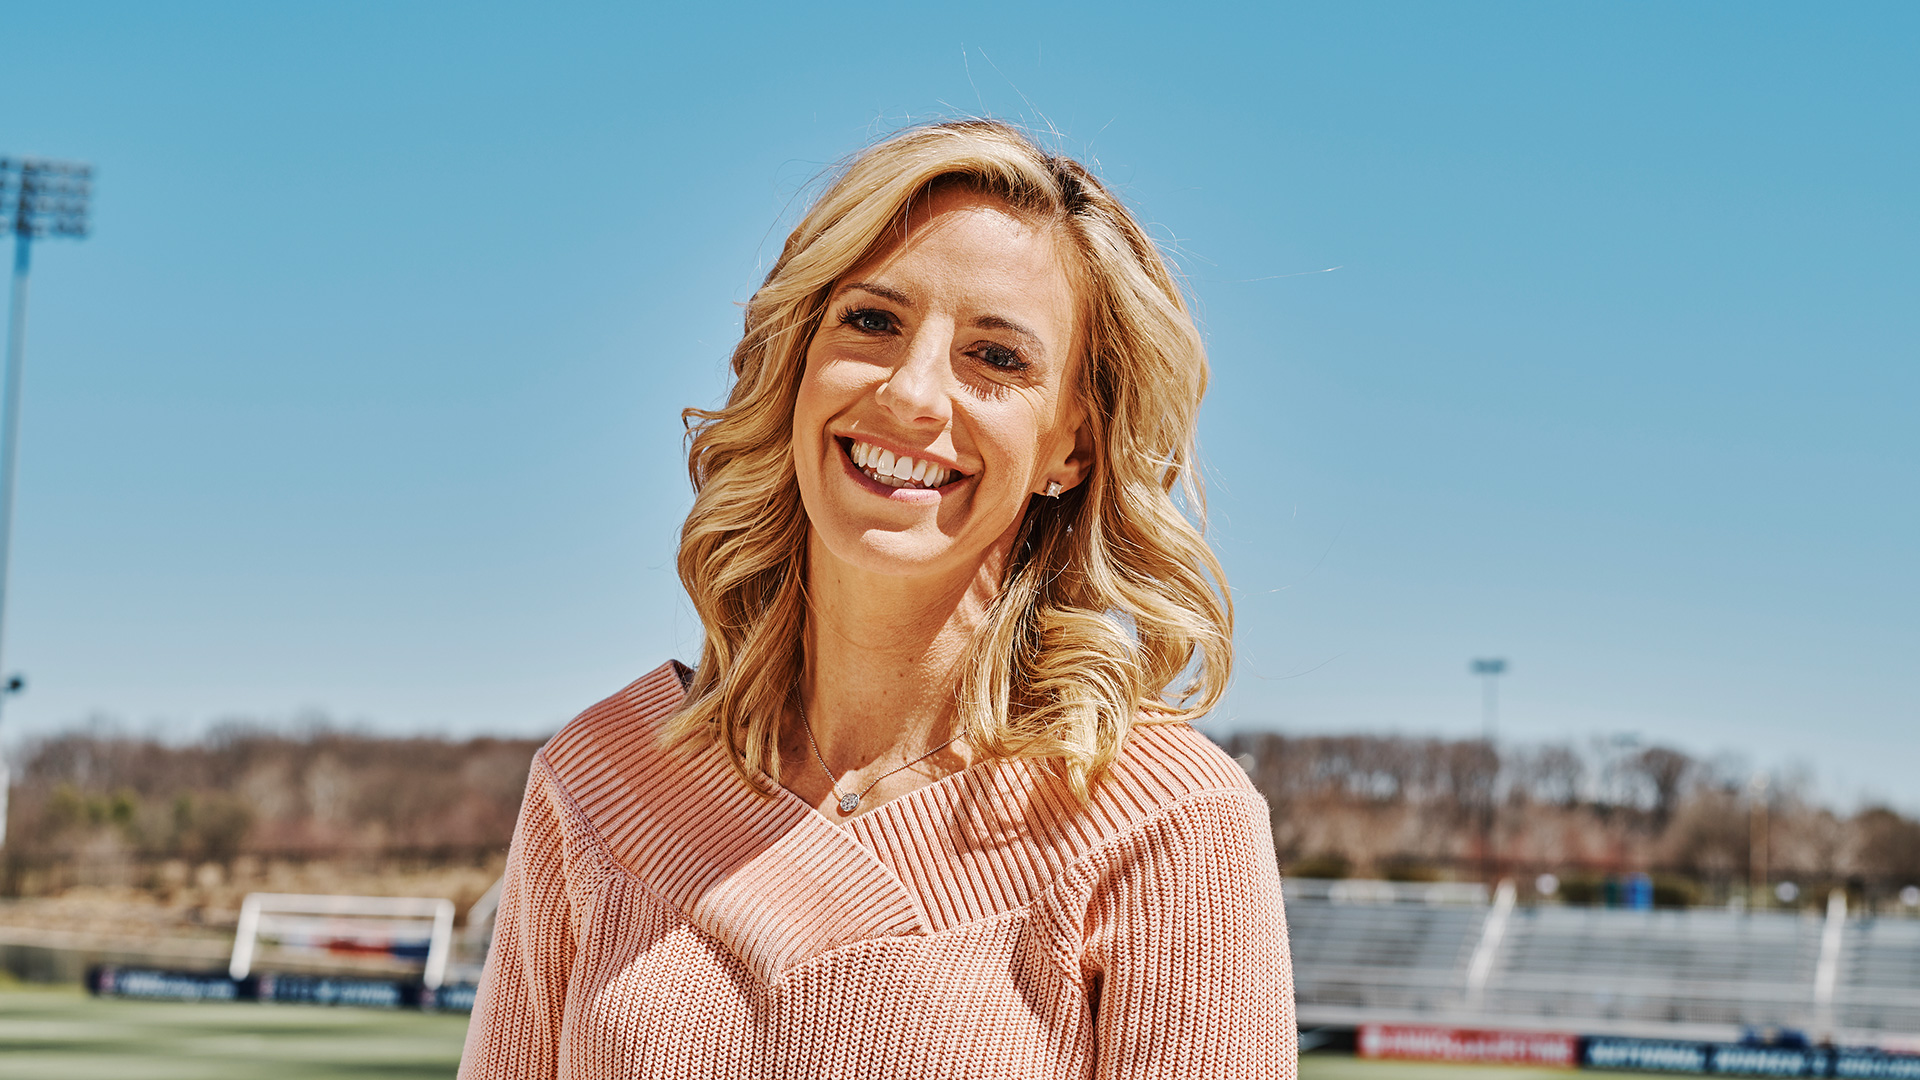 April 25, 2018: Aly Wagner Announced as the First Female Game Analyst for a Men's World Cup on U.S. Television